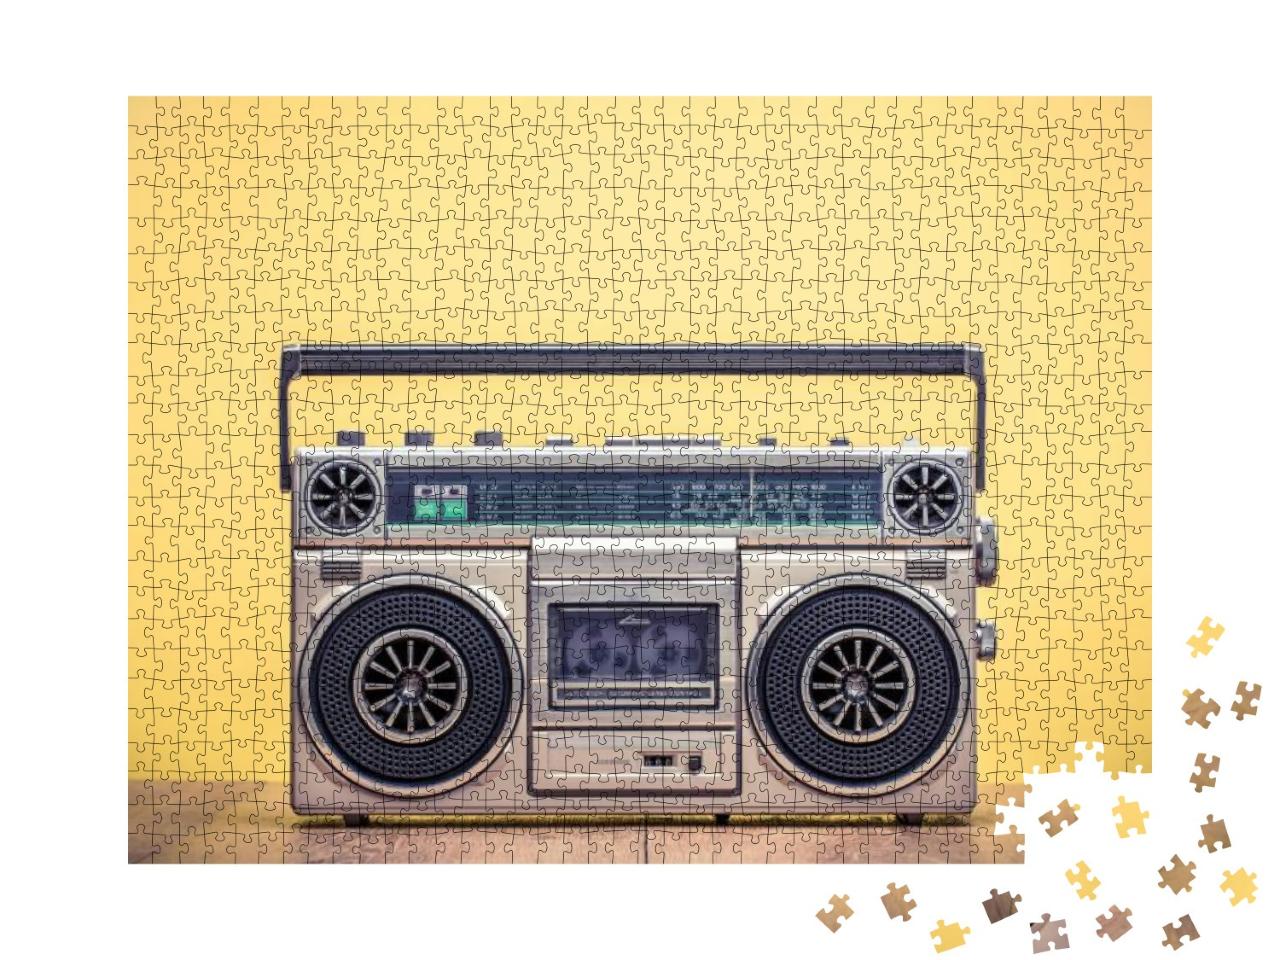 Retro Outdated Portable Stereo Boombox Radio Cassette Rec... Jigsaw Puzzle with 1000 pieces